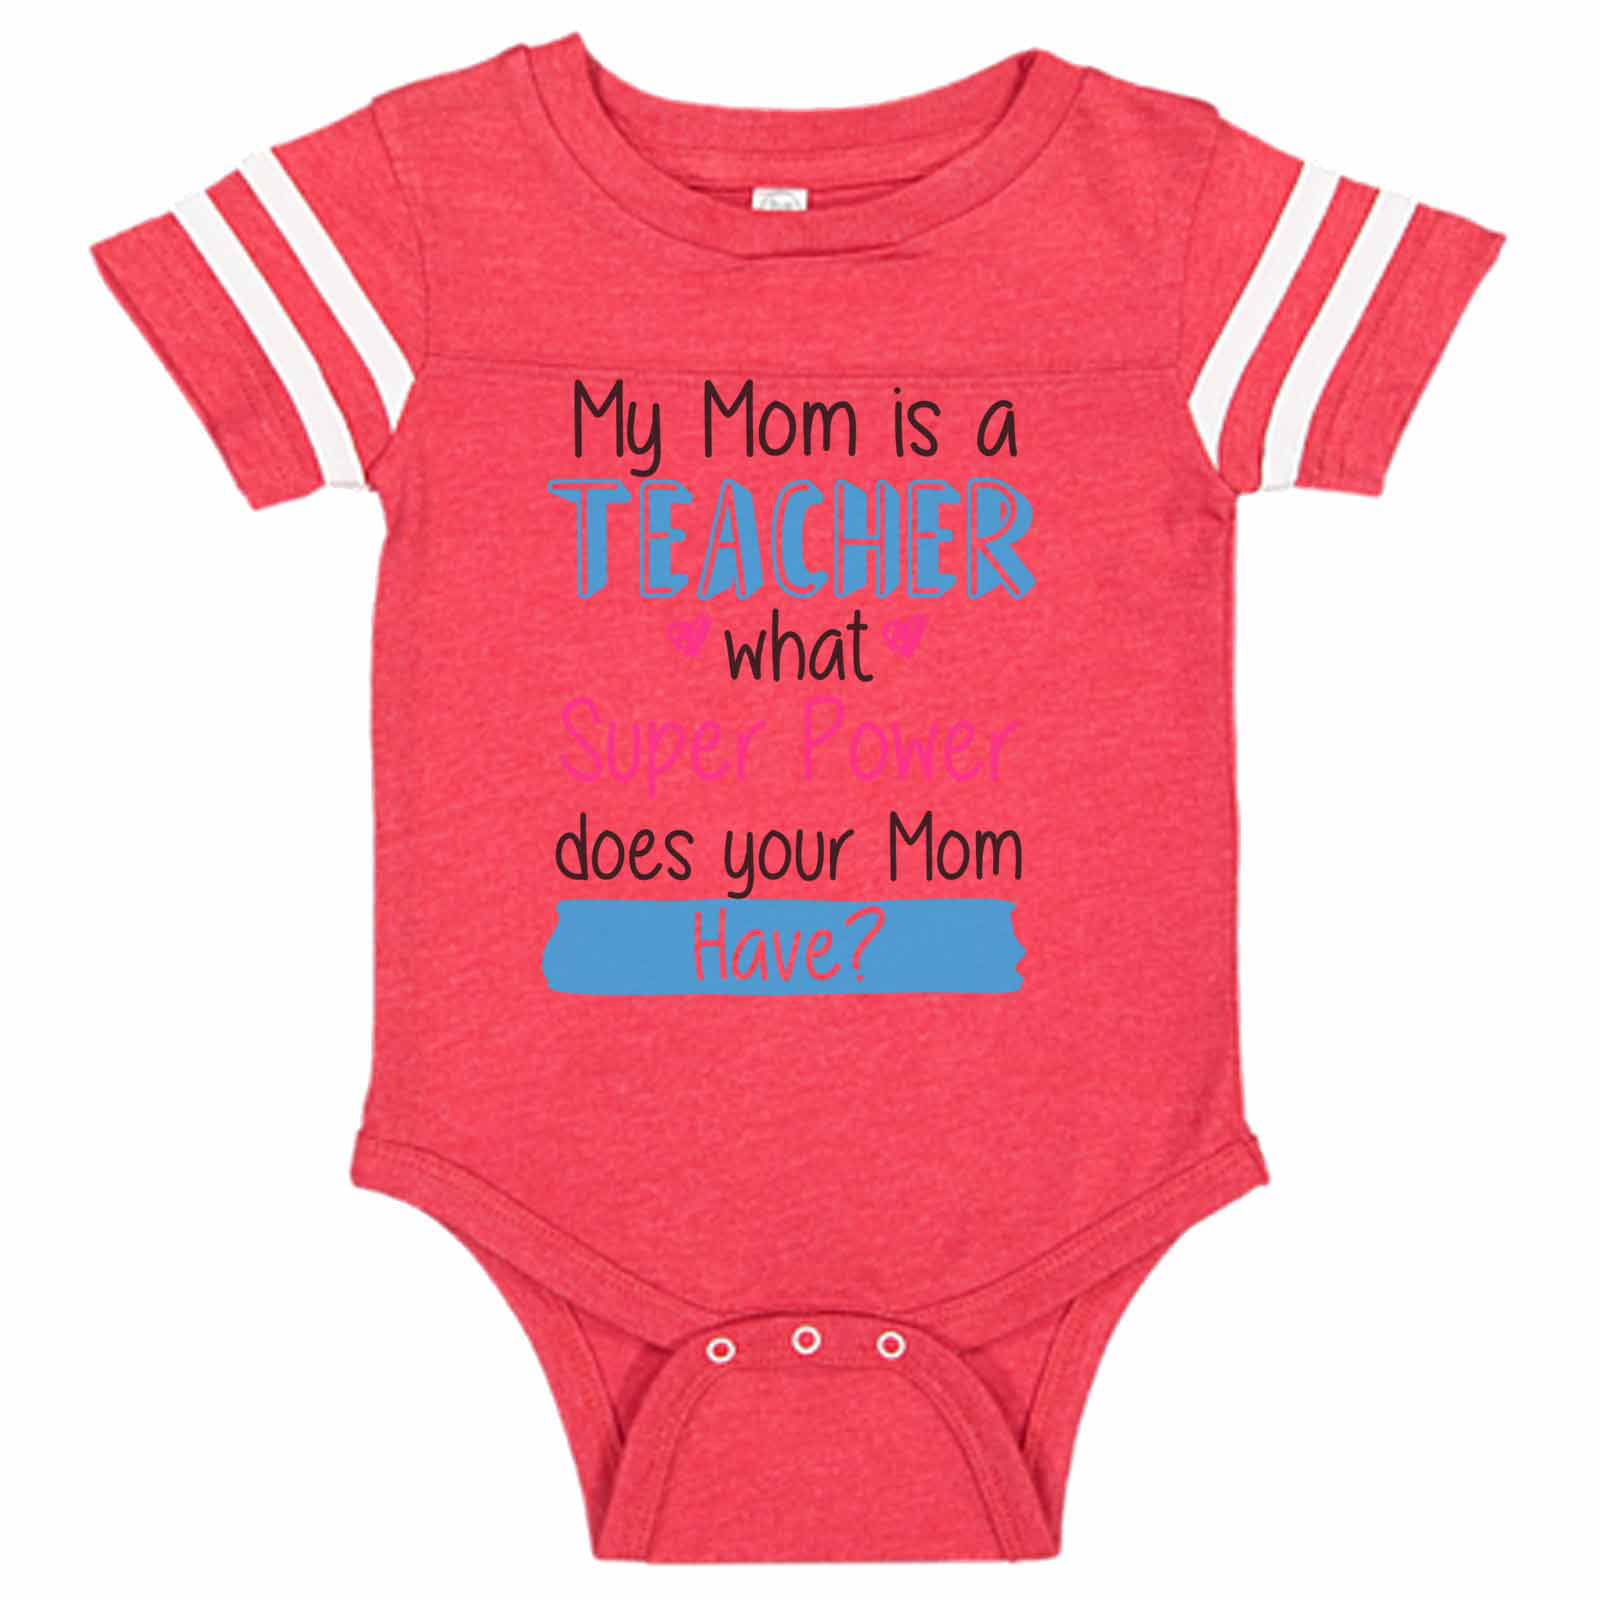 My Mums is A Teacher What Super Power Does Yours Have? Baby T-shirt Tees 